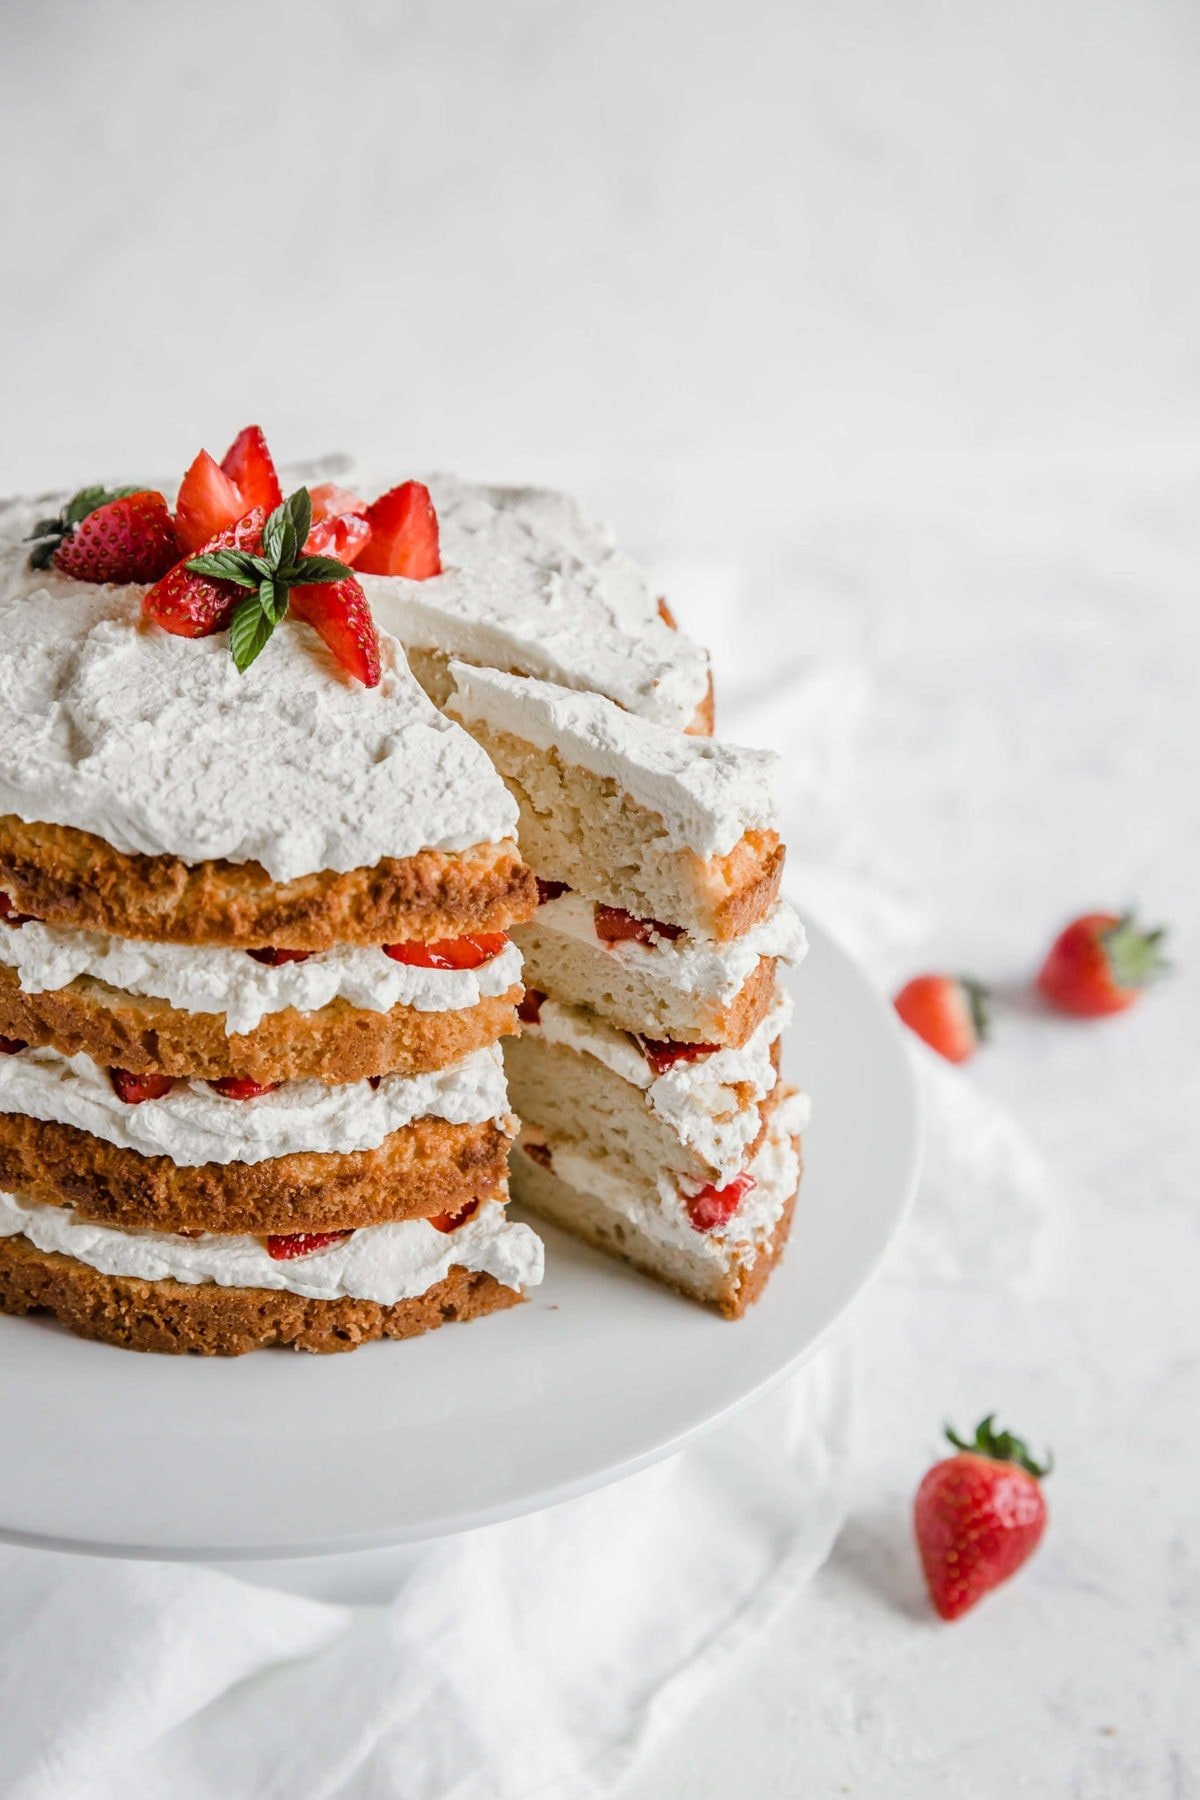 Strawberry shortcake with a slice cut out of it - cake, layered with whipped cream and strawberries